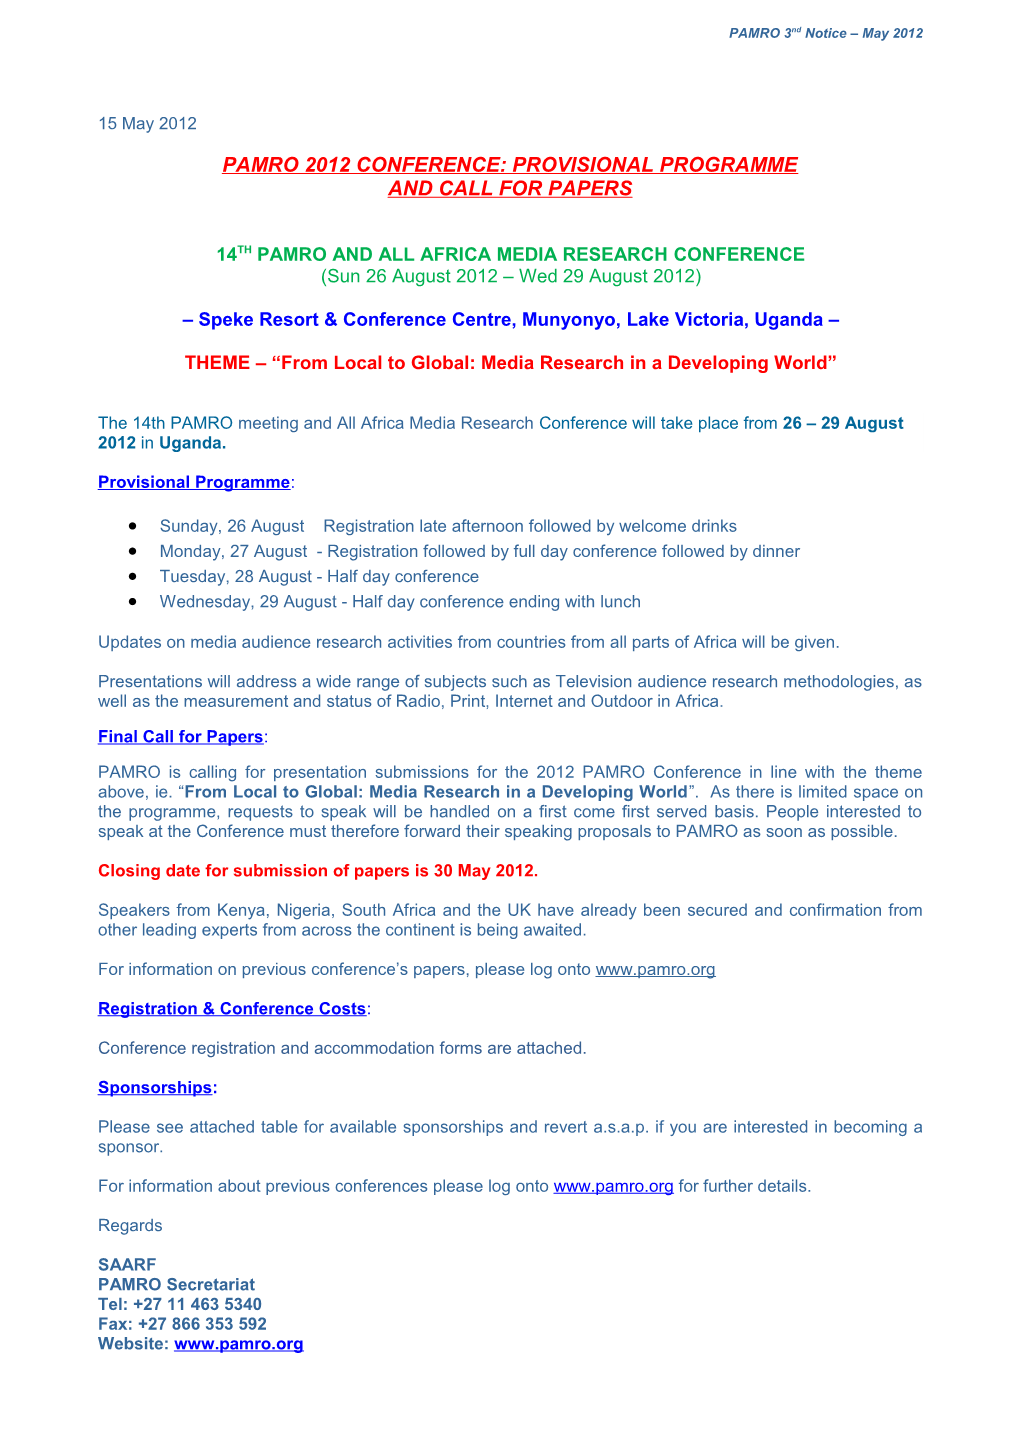 Pamro 2012 Conference:Provisional Programme